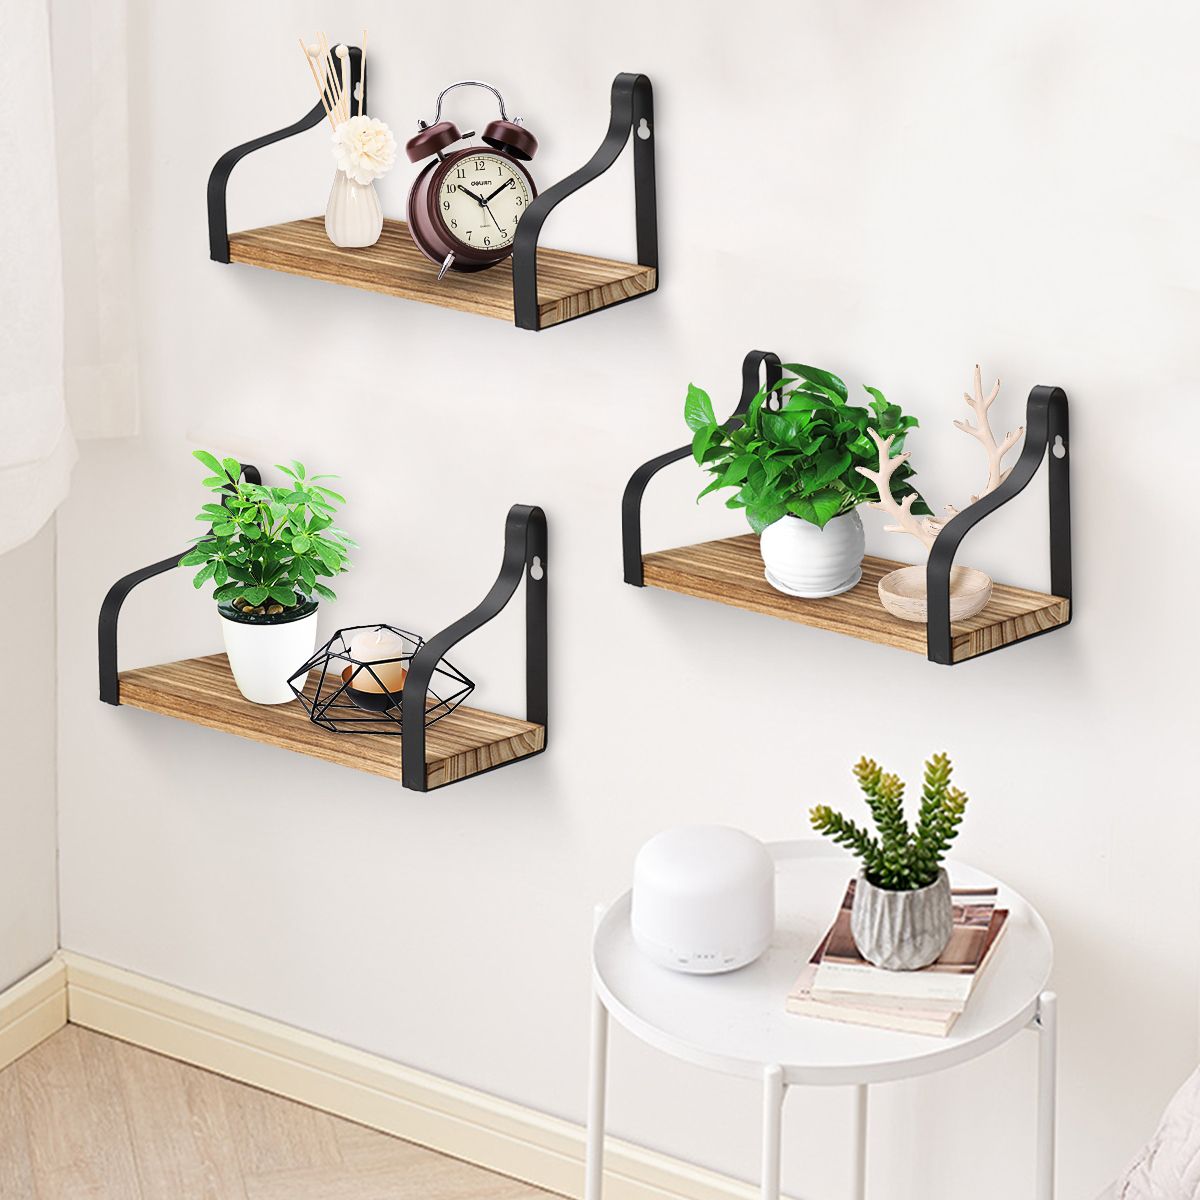 3pcs/set Rustic Wood Floating Shelves Wall Mounted Storage Shelf Multi Inside Recent Wall Art With Shelves (View 1 of 20)